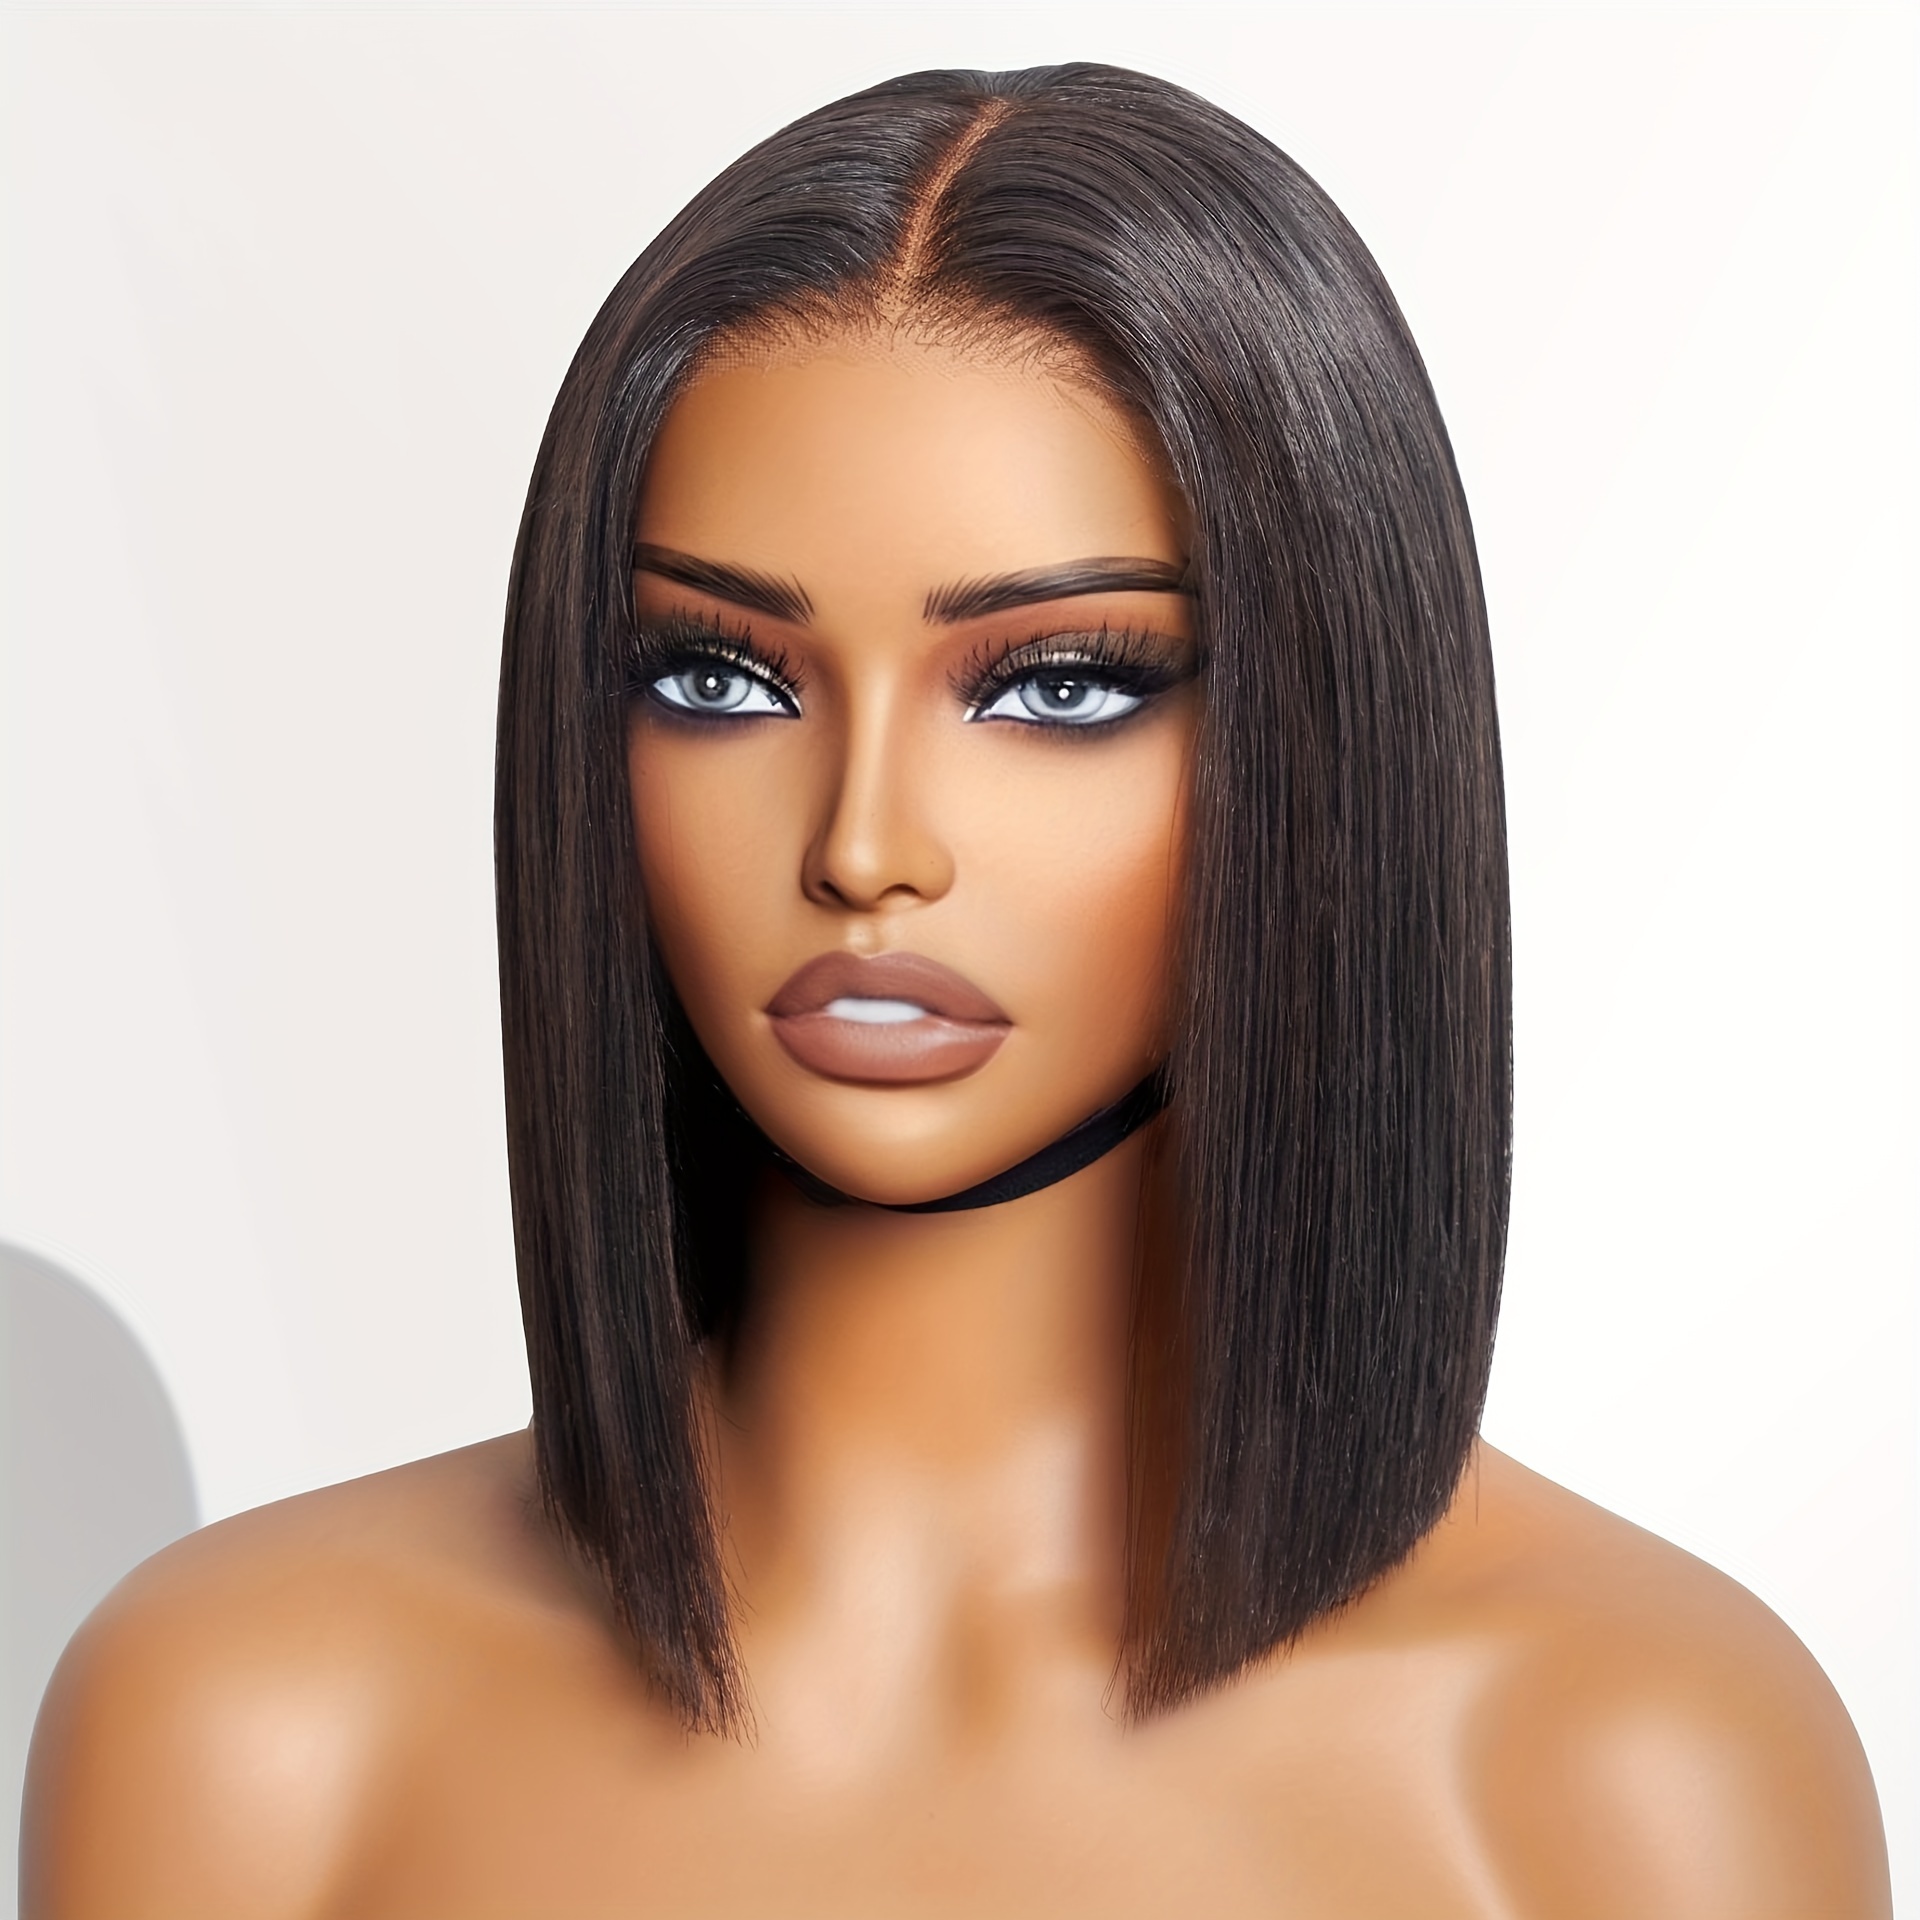 EASY 4X4 CLOSURE WIG FOR BEGINNERS ($120)